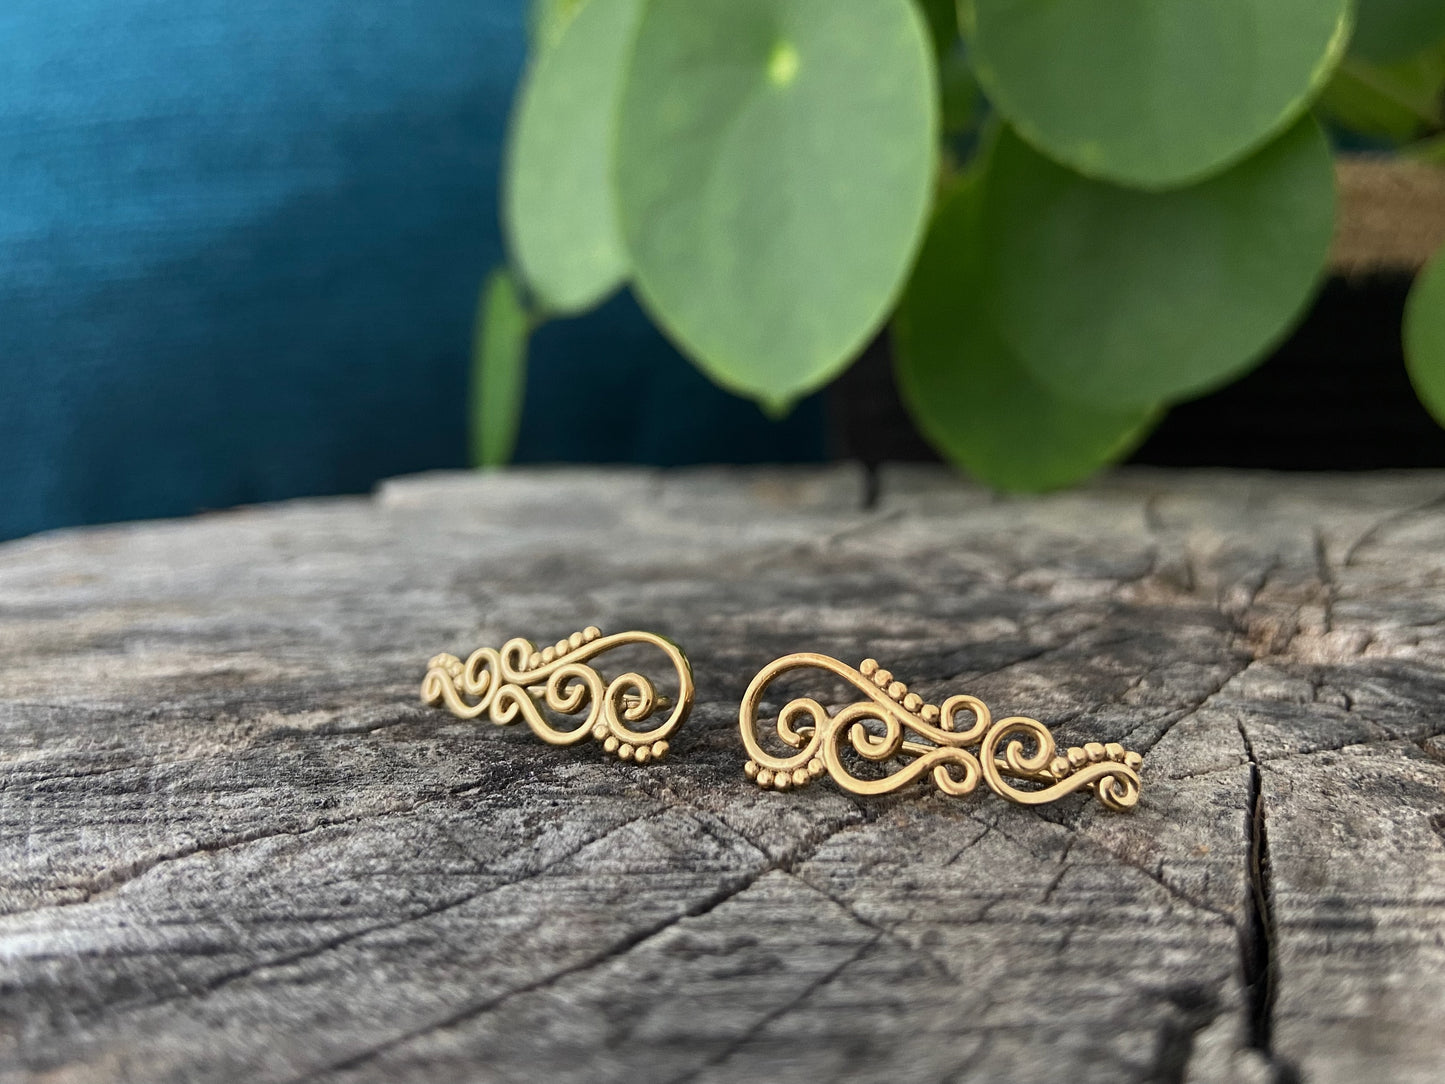 Earclimber earrings with spirals and dots plated gold 